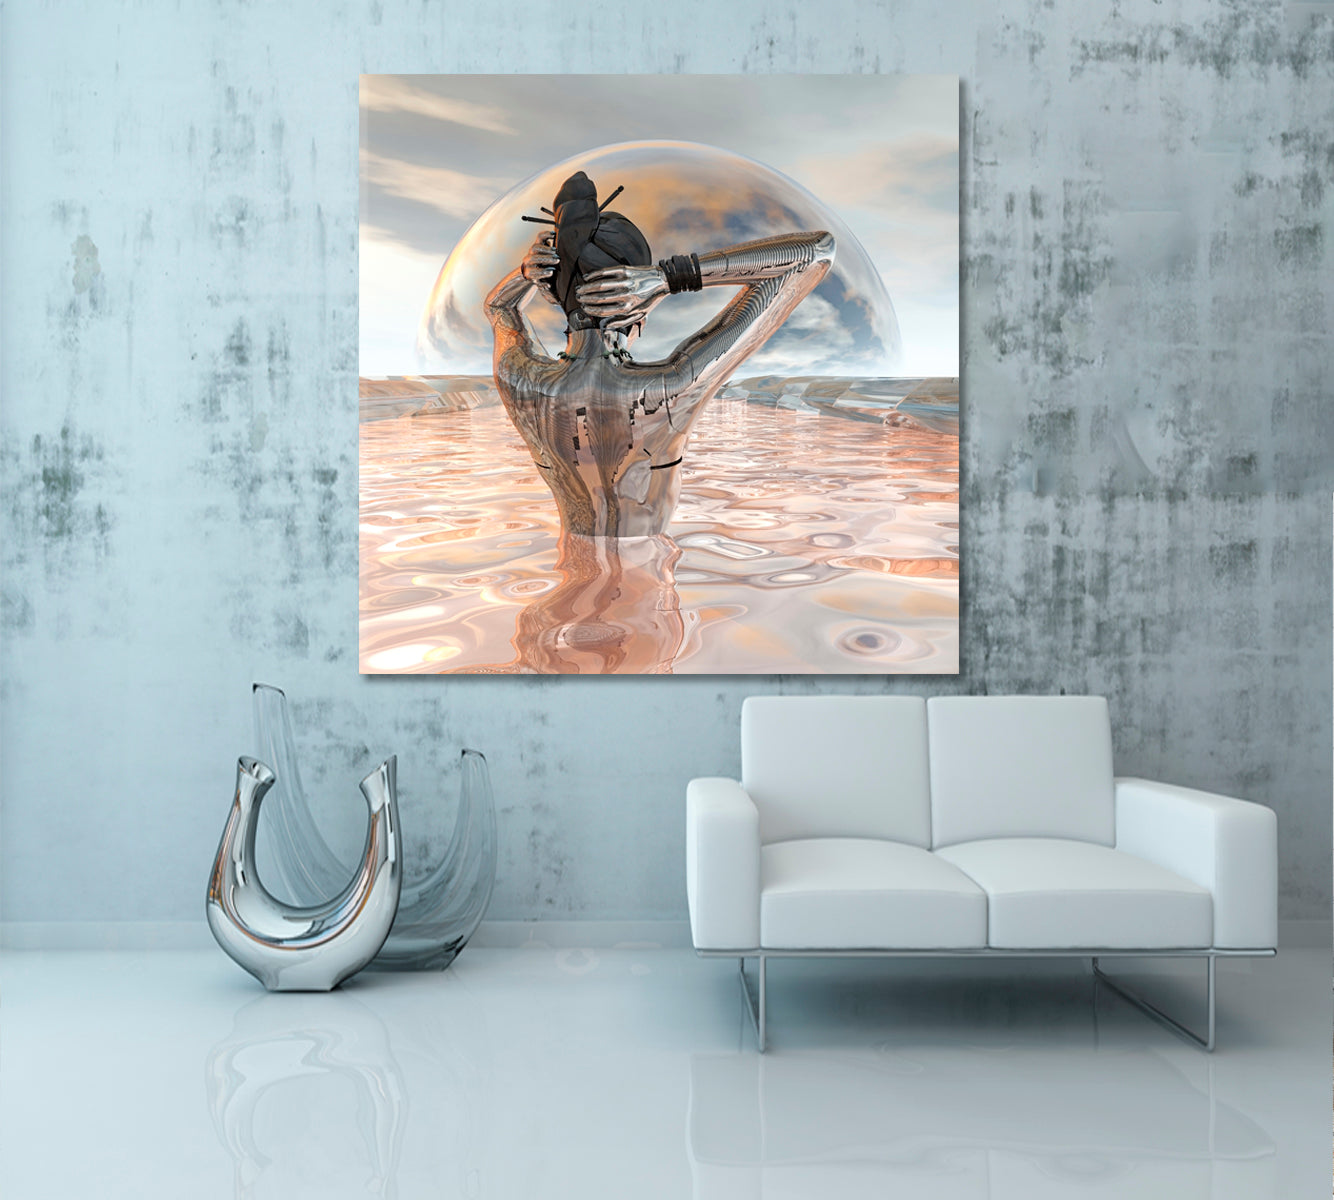 FANTASY Surreal | Source of Energy for Body and Soul Canvas Print - Square Panel Surreal Fantasy Large Art Print Décor Artesty   